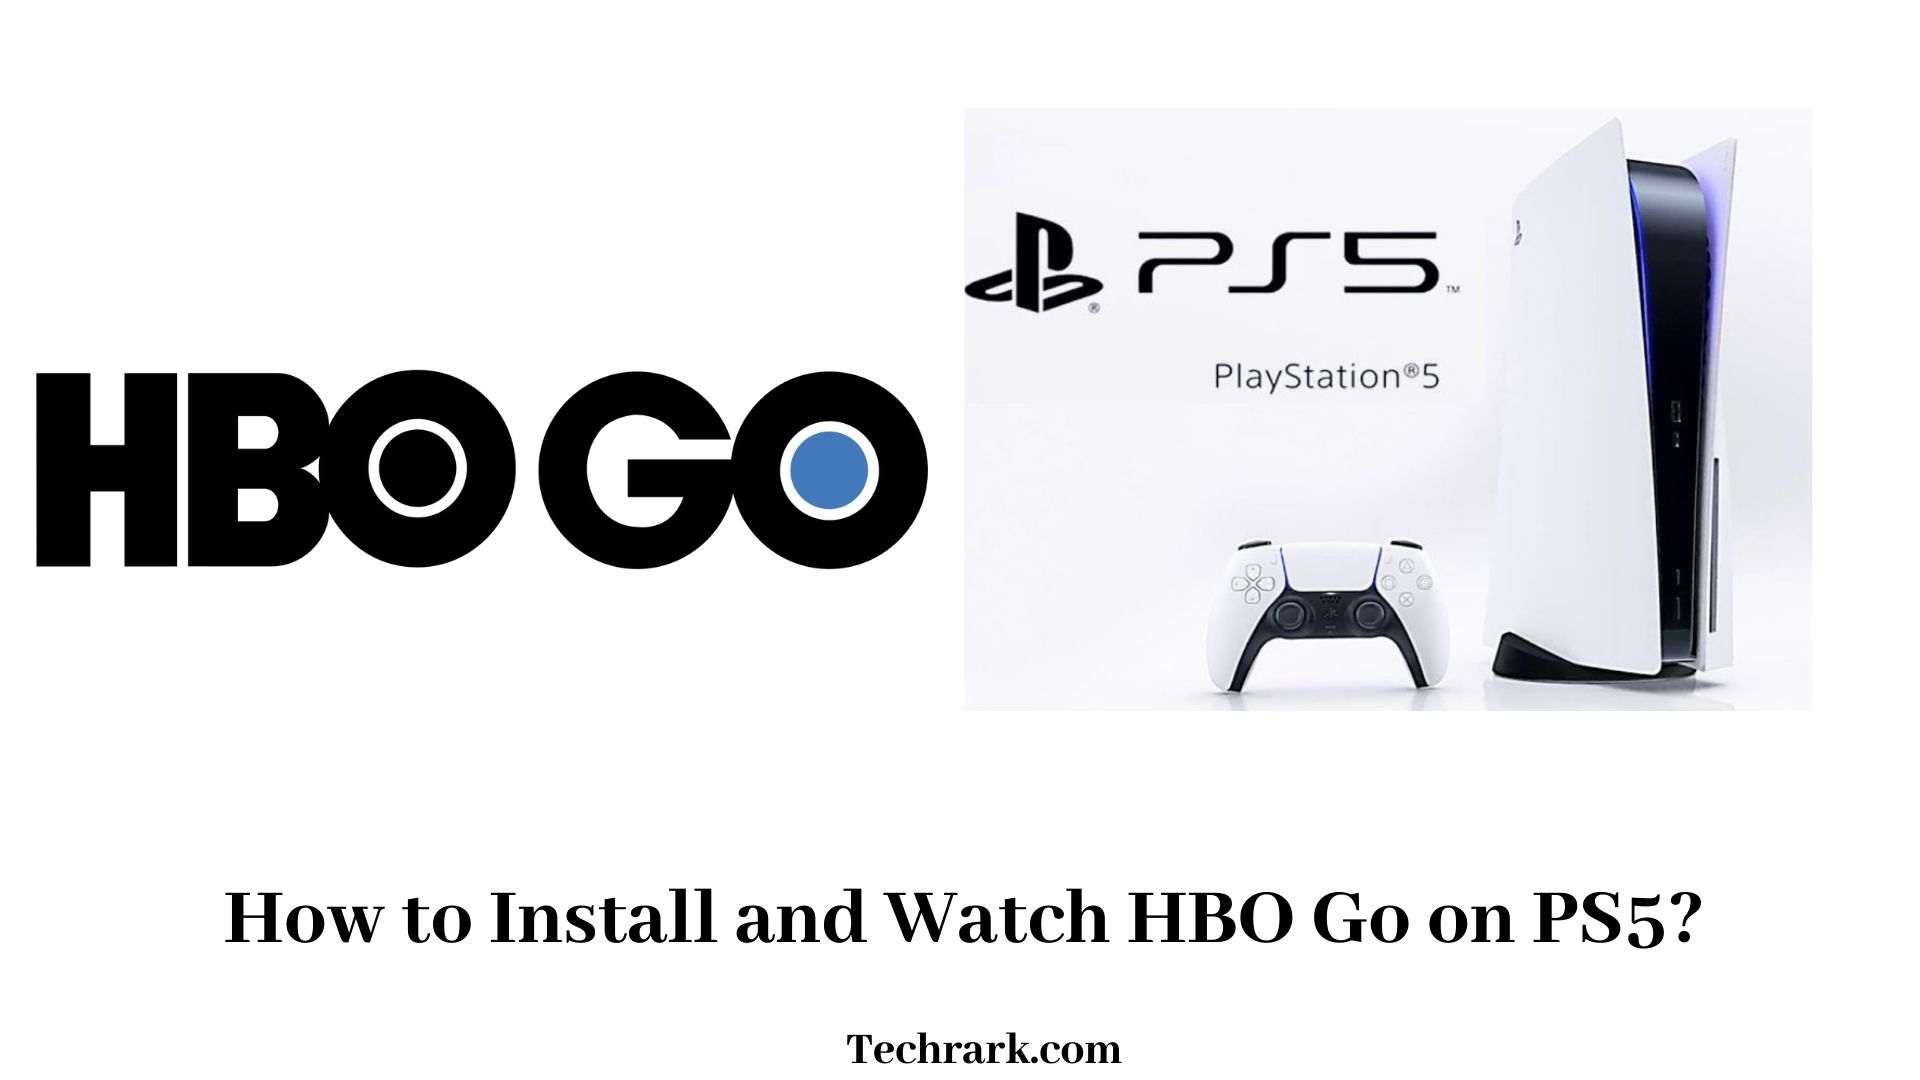 HBO Go on PS5